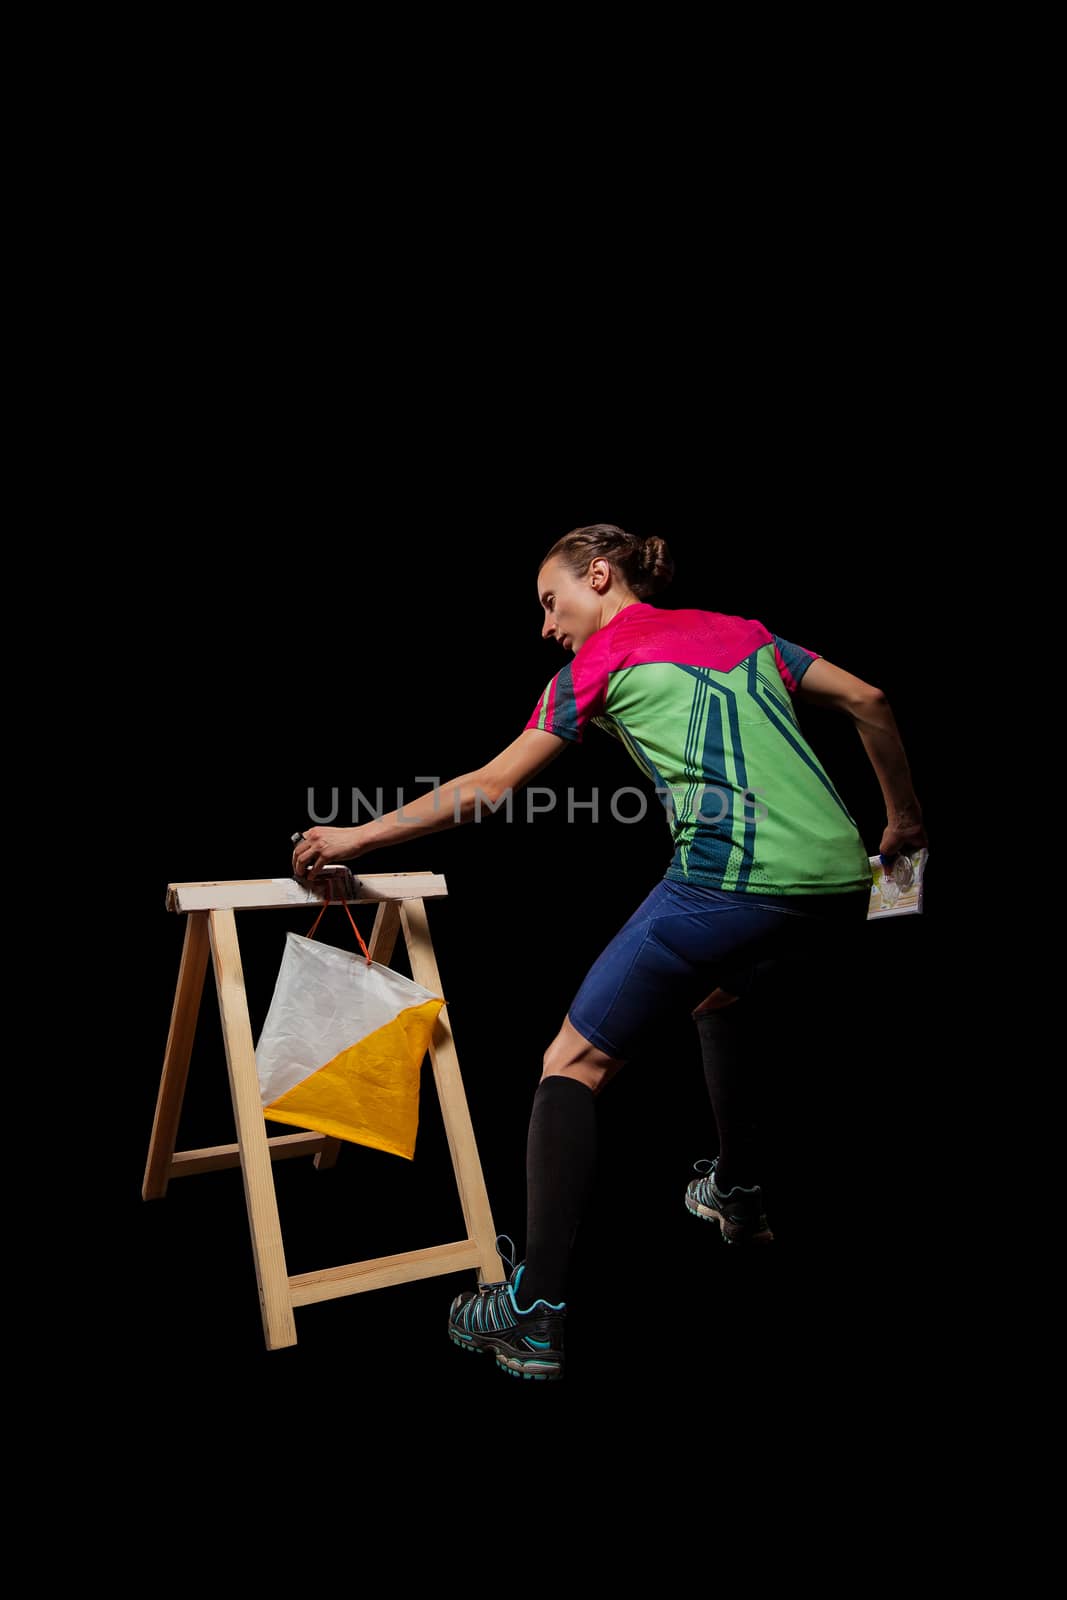 Woman punching at control point, taking part in orienteering competitions. Isolated on black. File contains clipping path